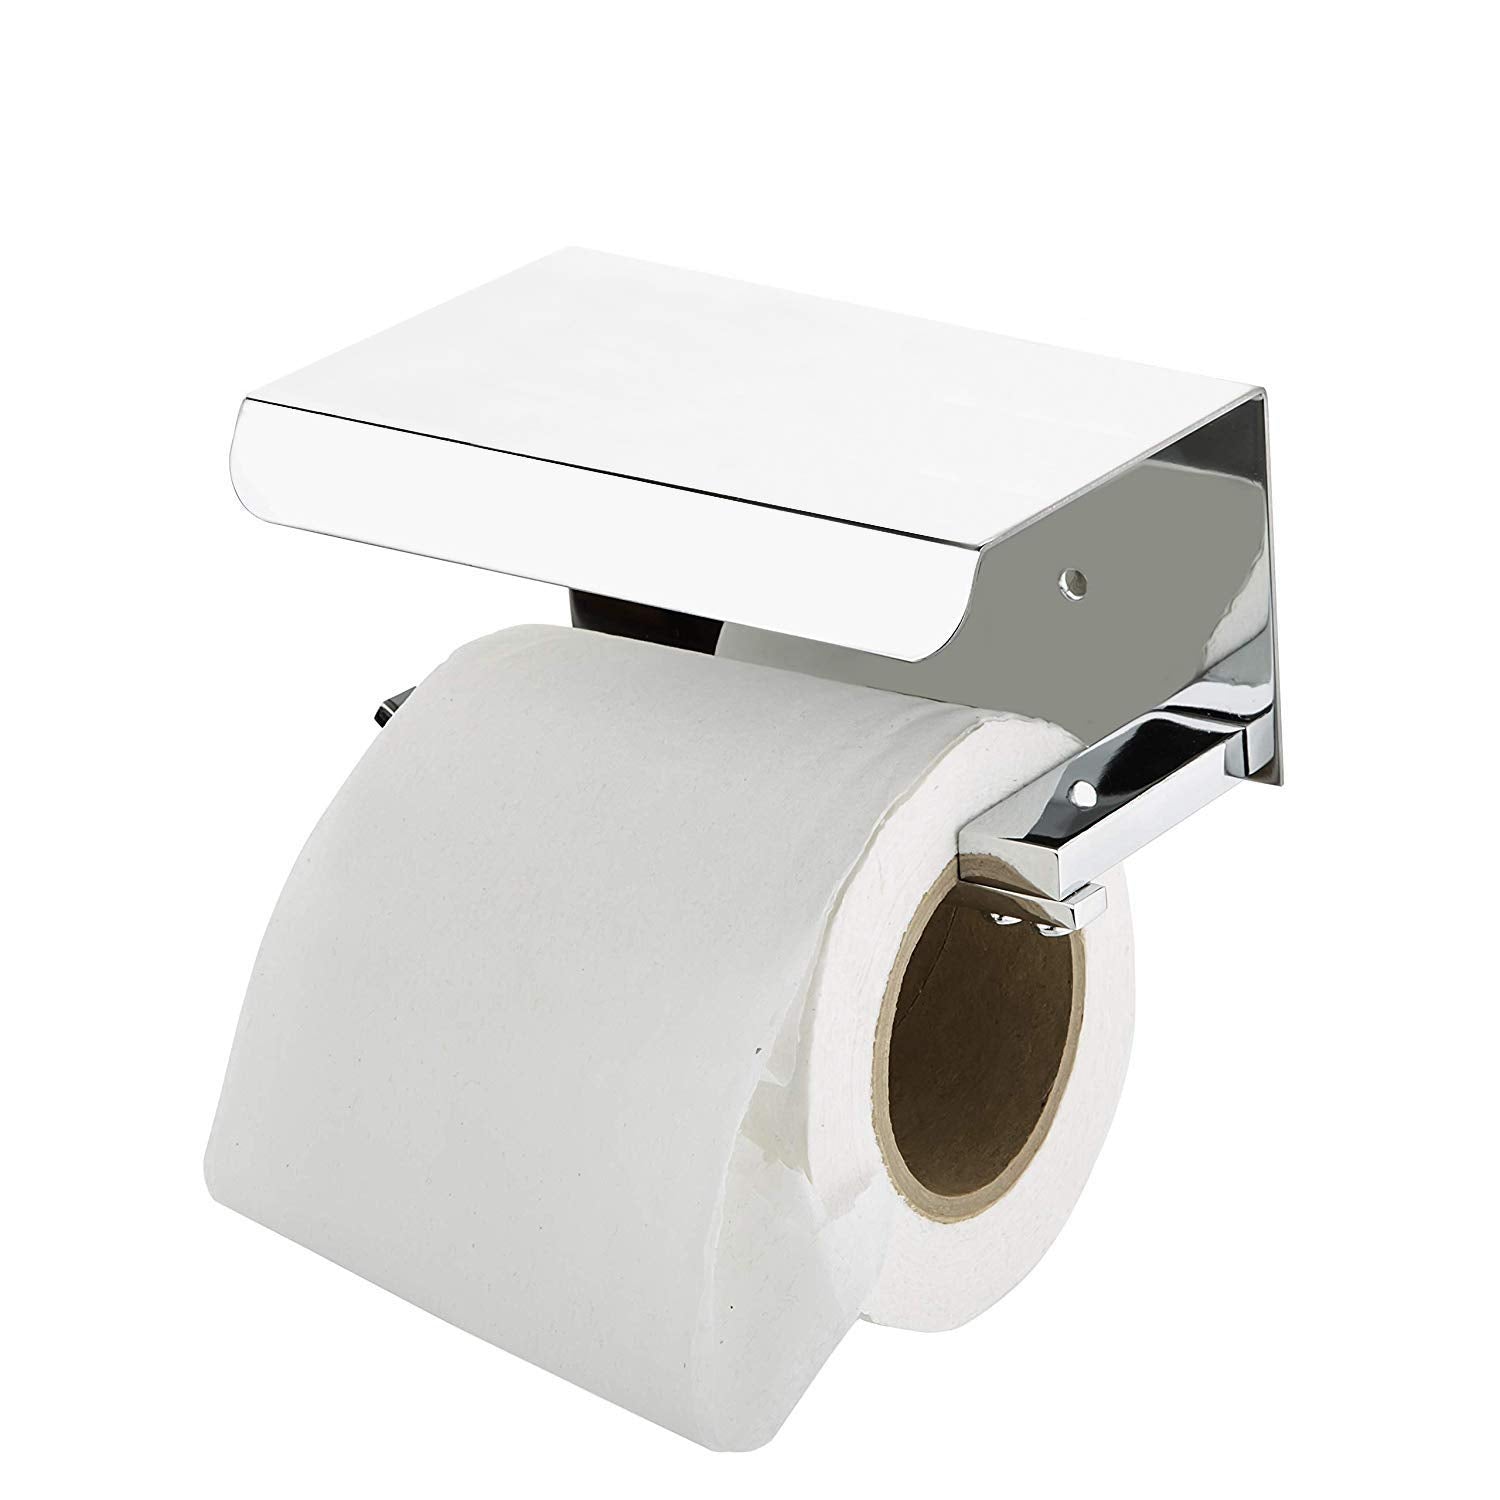 Plantex Platinum Stainless Steel 304 Grade Toilet Paper Holder with Mobile Phone Stand - Bathroom Accessories (Chrome Finish)